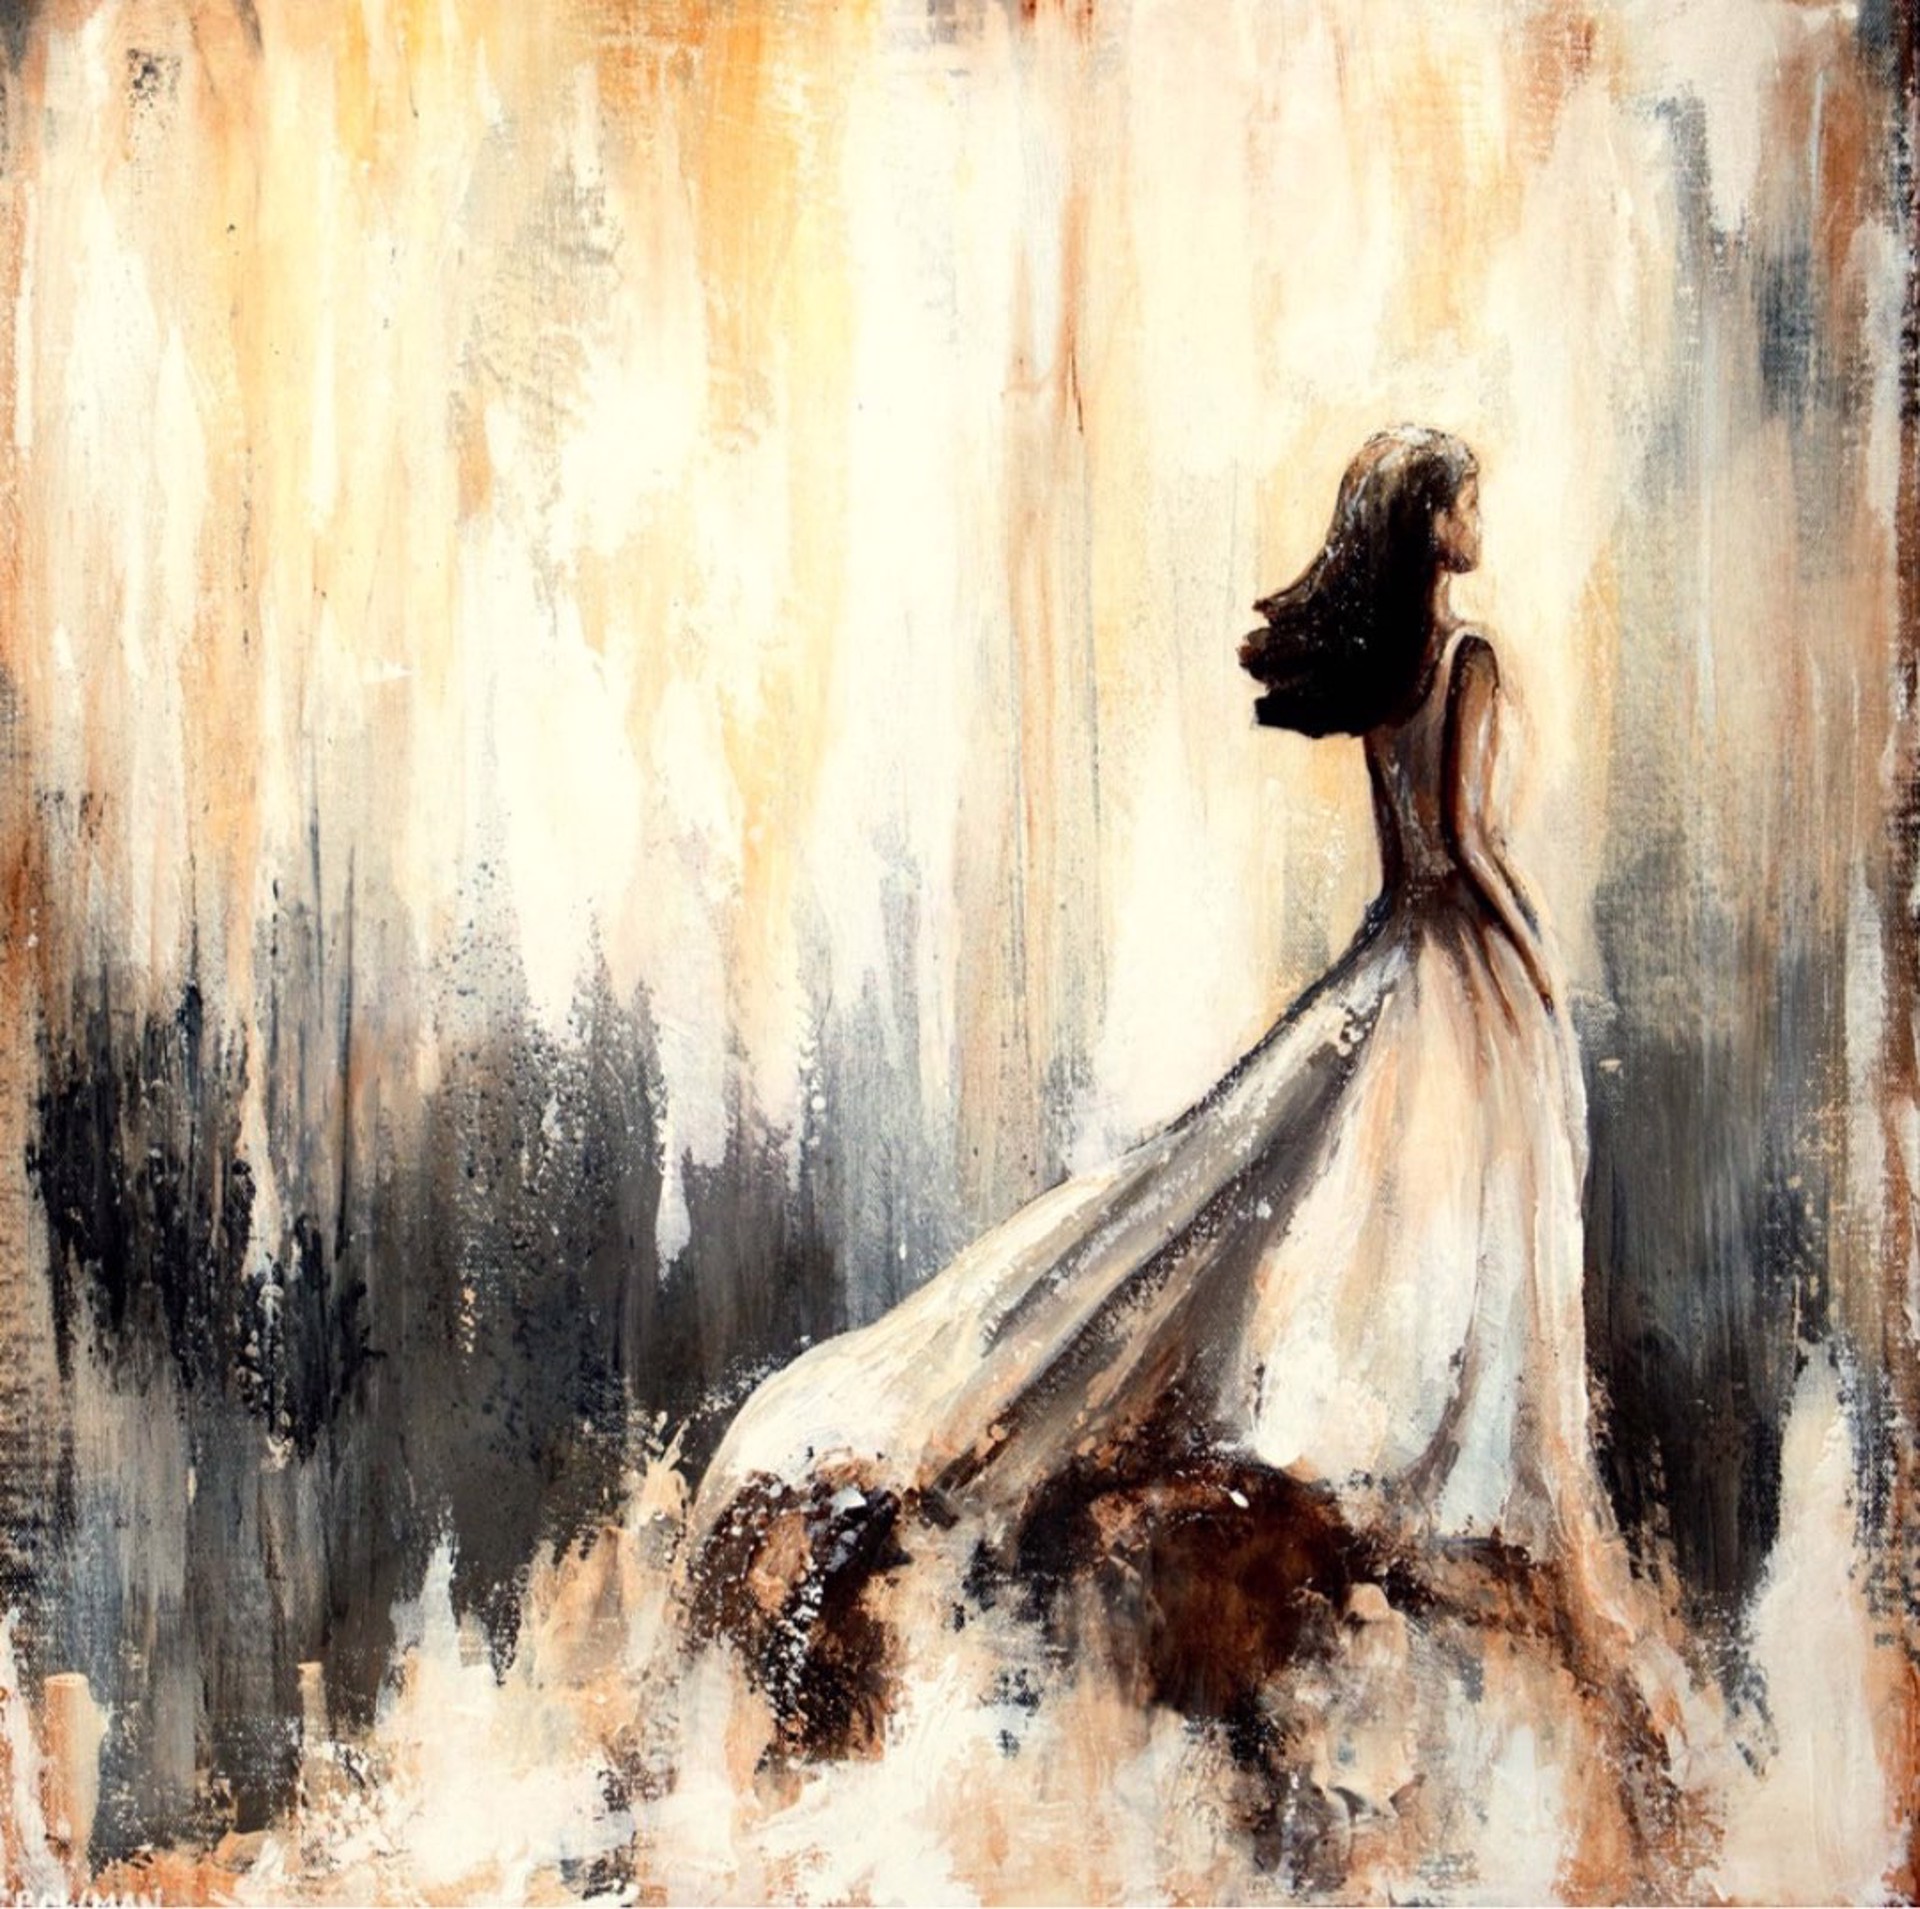 Walking Out of the Ashes by Laura Bowman